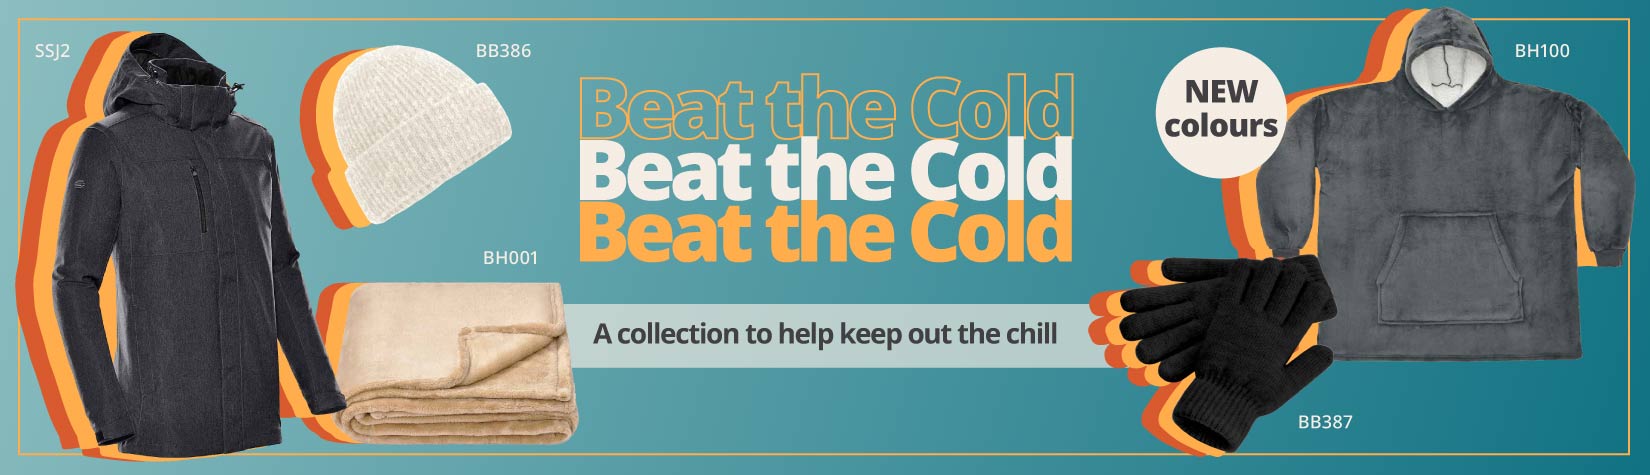 Keep out the chill this Winter